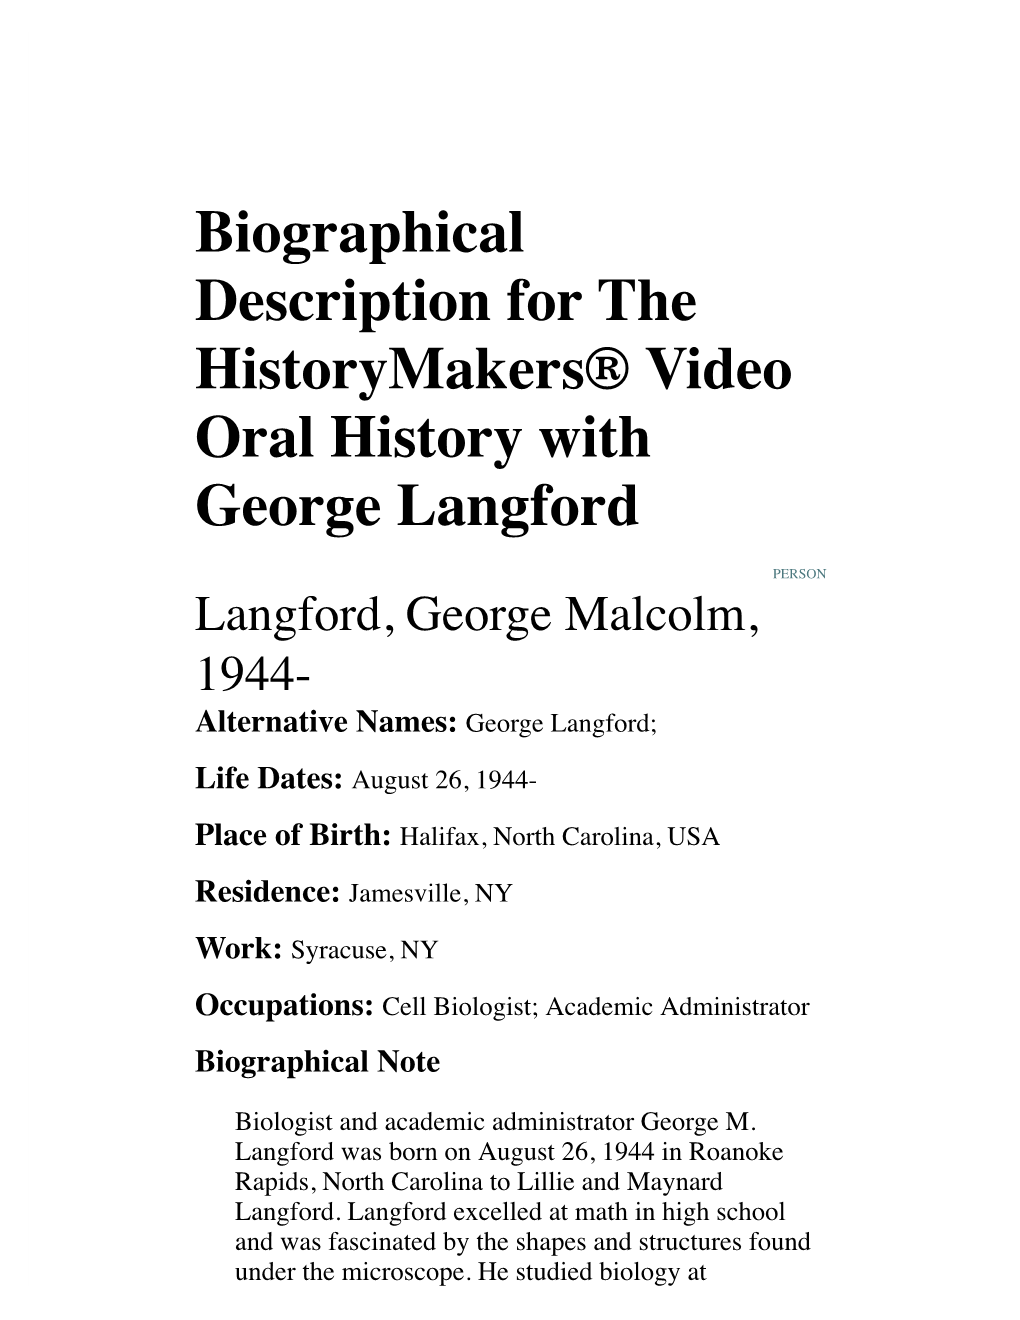 Biographical Description for the Historymakers® Video Oral History with George Langford